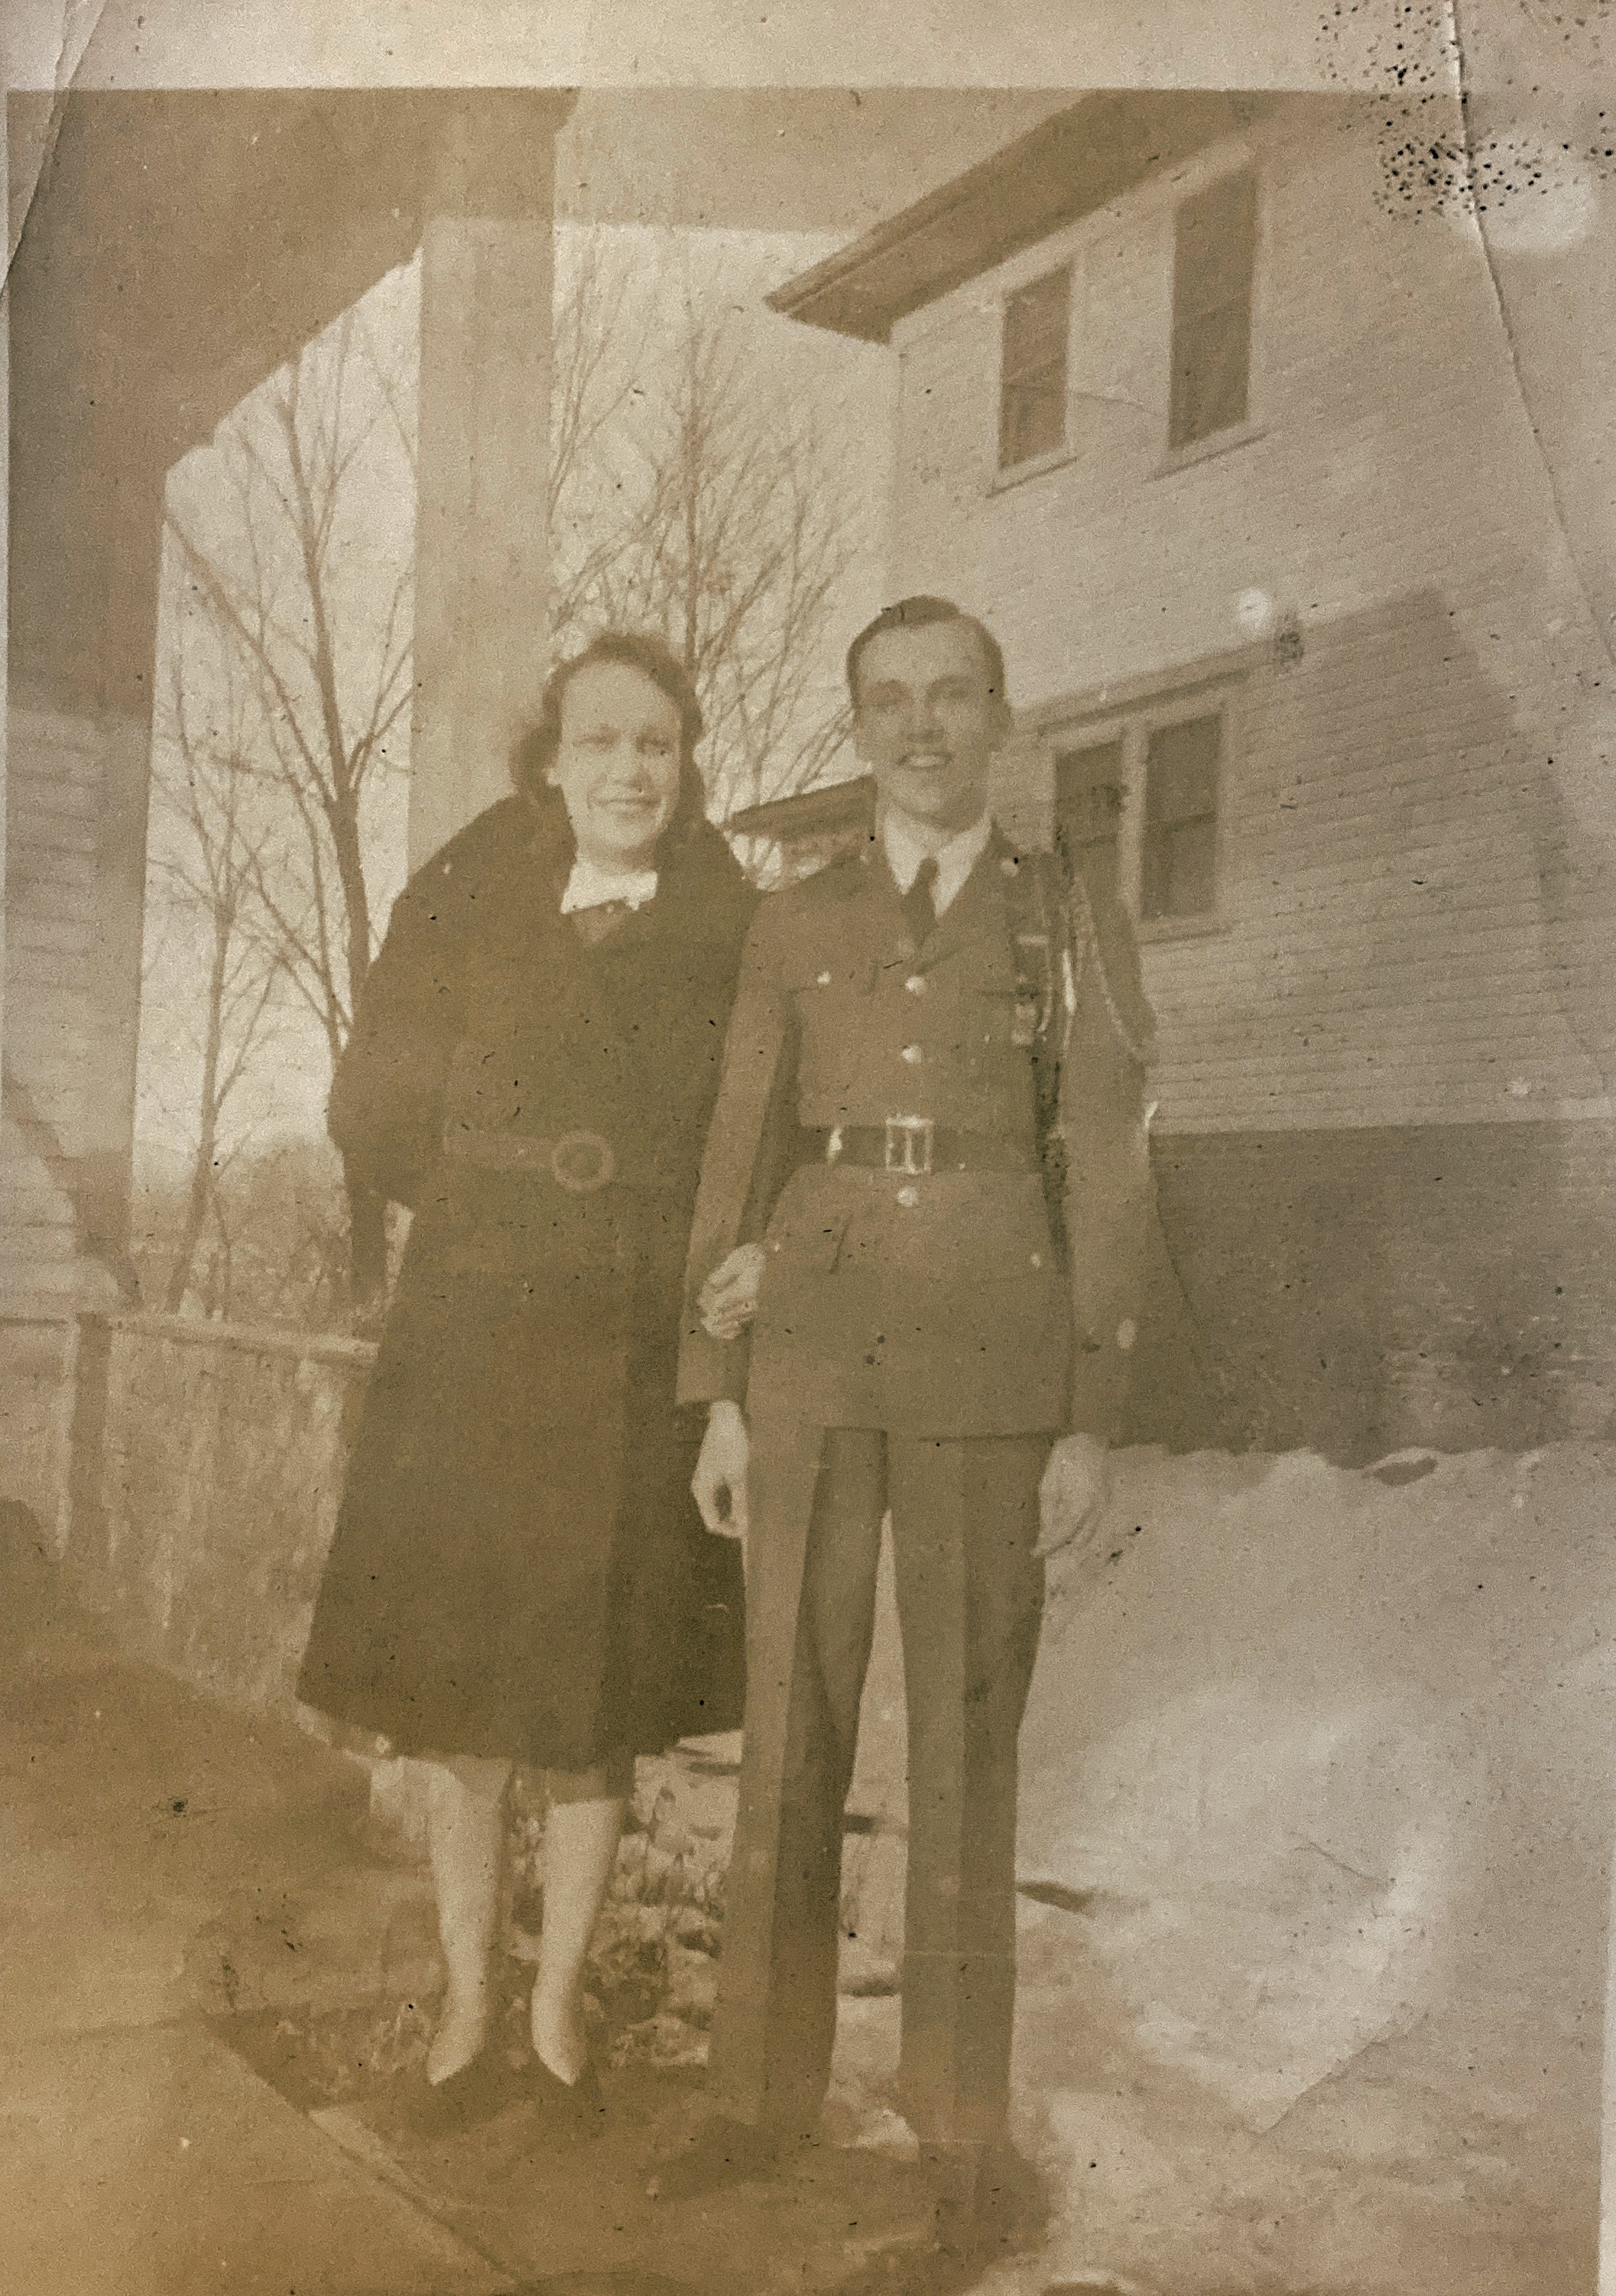 Myra Queen with her brother Allen in his ROTC uniform in the 1940’s. He was a sgt. 